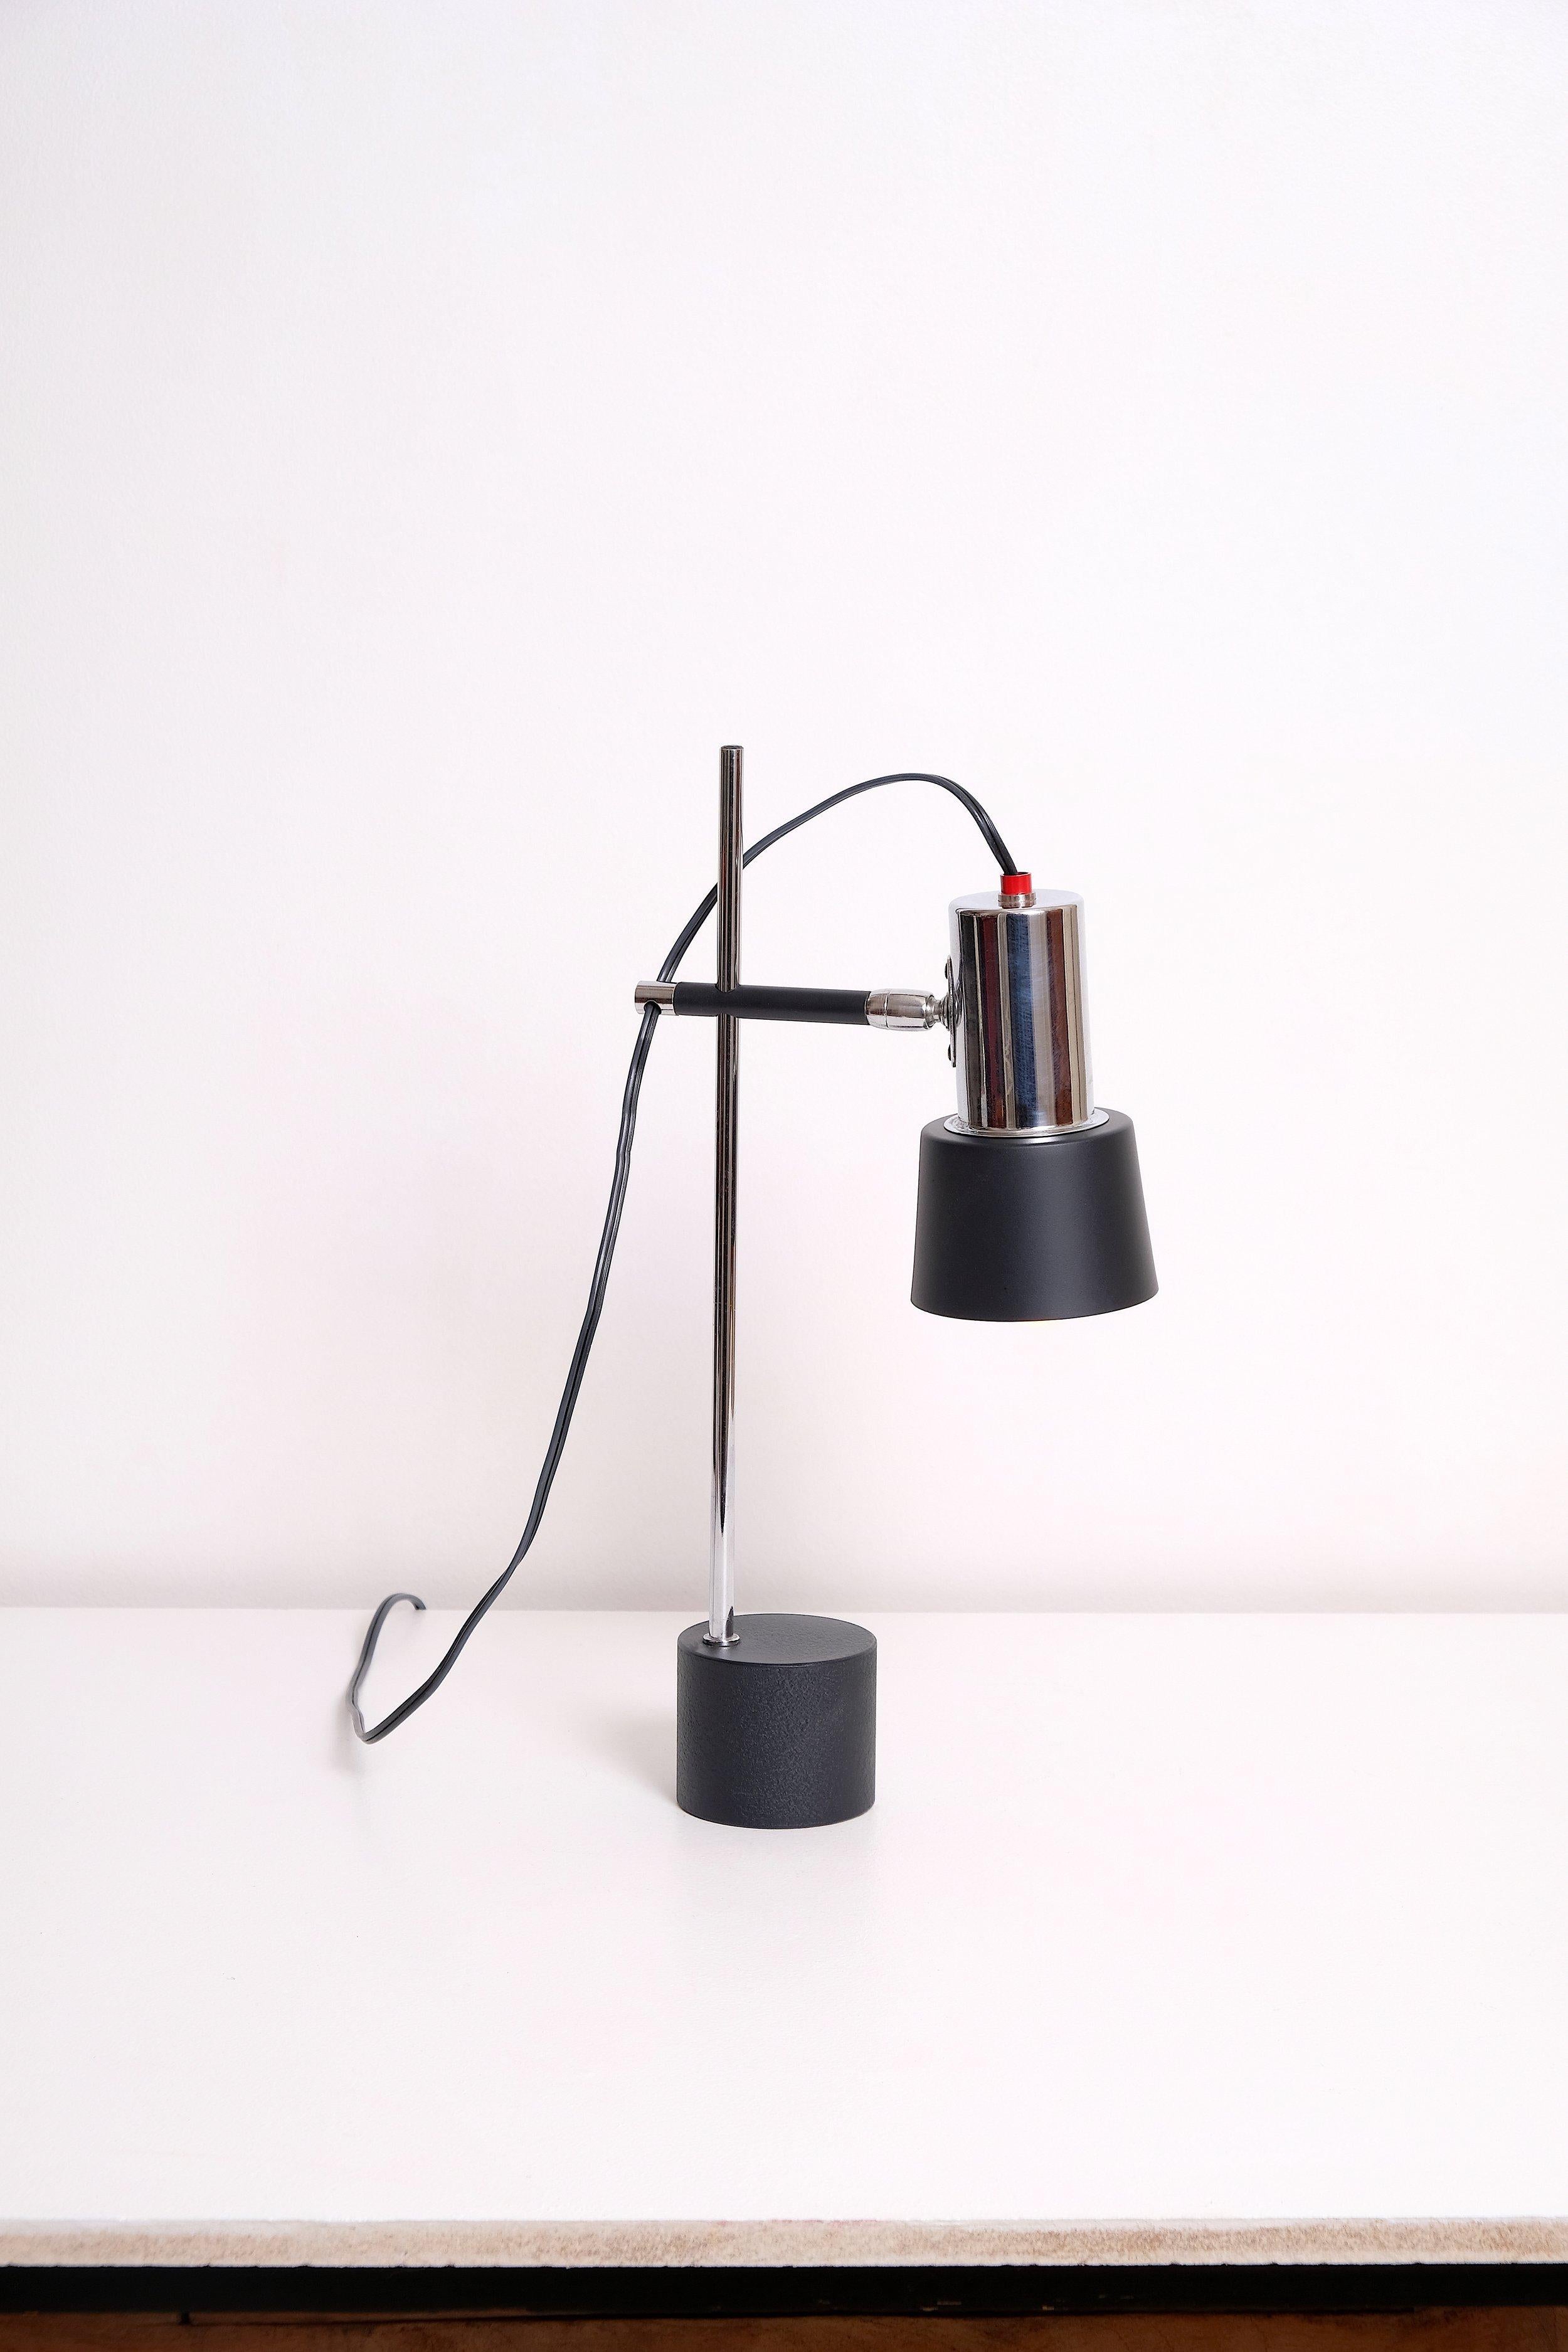 Small desk lamp made in Italy. Chromed brass and lacquered aluminium shade, chromed brass fittings, lacquered steel base. 40 watts max E-12 North American bulb recommended or higher if LED/CFL.

Rewired with a E-12 candelabra base socket, 18/2 black